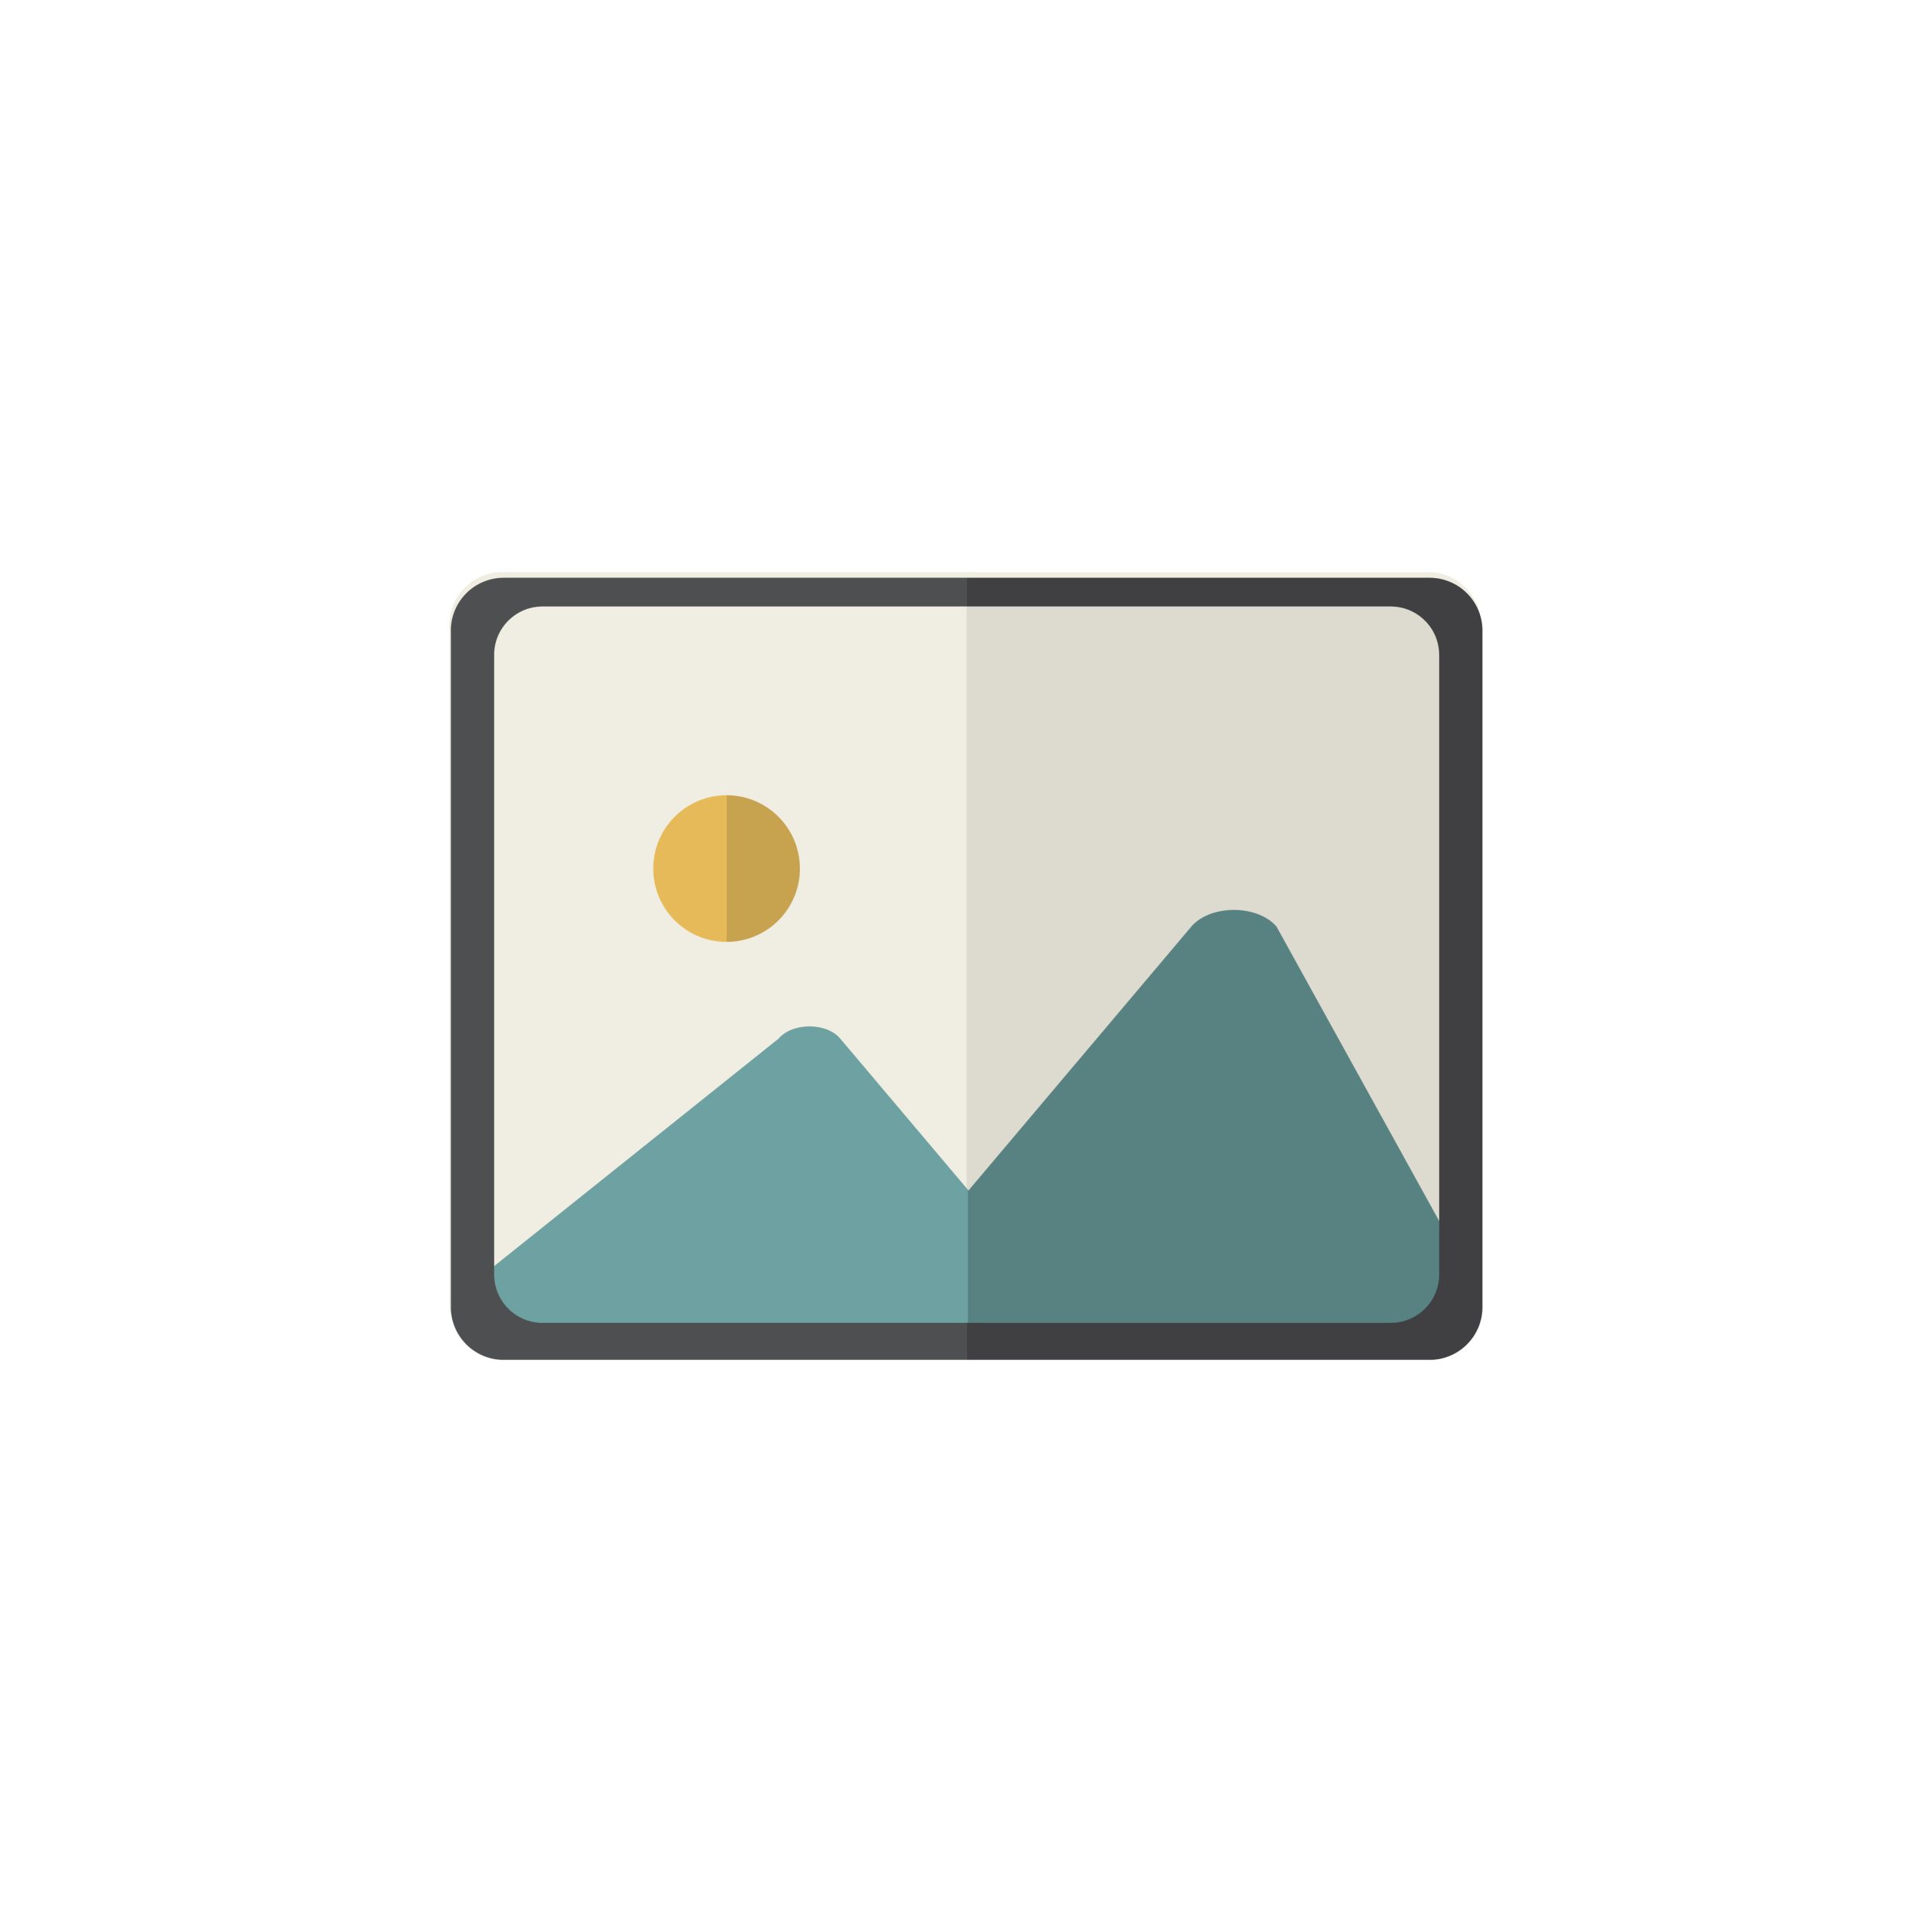 A flat photo icon with a mountain in the background.